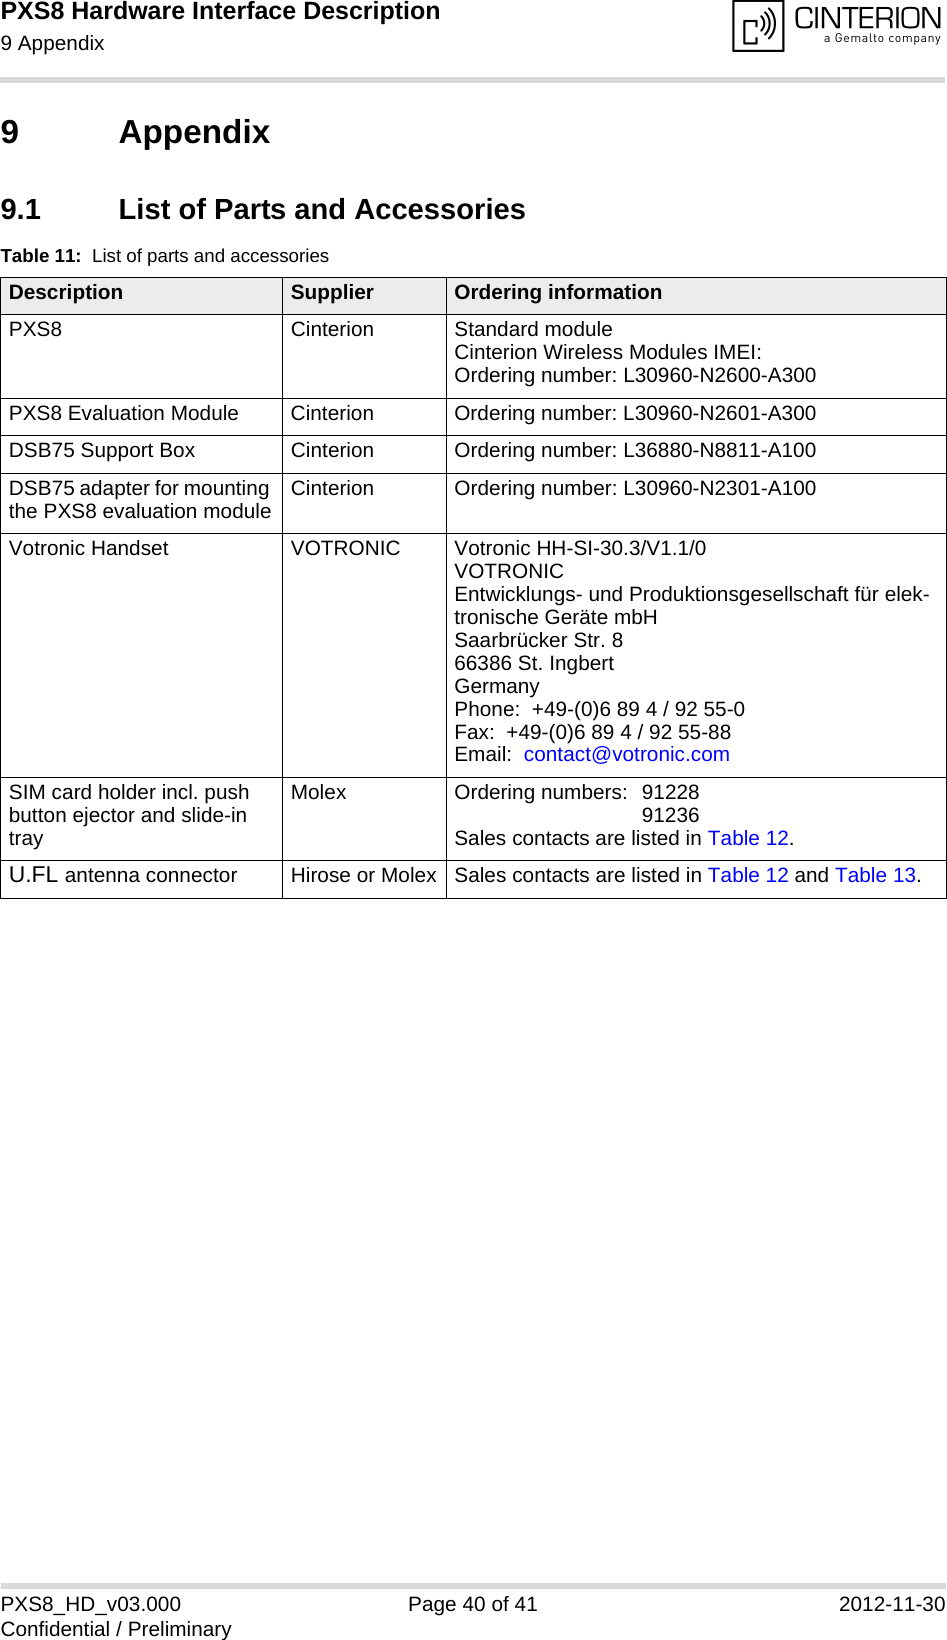 PXS8 Hardware Interface Description9 Appendix41PXS8_HD_v03.000 Page 40 of 41 2012-11-30Confidential / Preliminary9 Appendix9.1 List of Parts and AccessoriesTable 11:  List of parts and accessoriesDescription Supplier Ordering informationPXS8 Cinterion Standard module Cinterion Wireless Modules IMEI:Ordering number: L30960-N2600-A300PXS8 Evaluation Module Cinterion Ordering number: L30960-N2601-A300DSB75 Support Box Cinterion Ordering number: L36880-N8811-A100DSB75 adapter for mounting the PXS8 evaluation module Cinterion Ordering number: L30960-N2301-A100Votronic Handset VOTRONIC Votronic HH-SI-30.3/V1.1/0VOTRONIC Entwicklungs- und Produktionsgesellschaft für elek-tronische Geräte mbHSaarbrücker Str. 866386 St. IngbertGermanyPhone:  +49-(0)6 89 4 / 92 55-0Fax:  +49-(0)6 89 4 / 92 55-88Email:  contact@votronic.comSIM card holder incl. push button ejector and slide-in trayMolex Ordering numbers:  91228 91236Sales contacts are listed in Table 12.U.FL antenna connector Hirose or Molex Sales contacts are listed in Table 12 and Table 13.